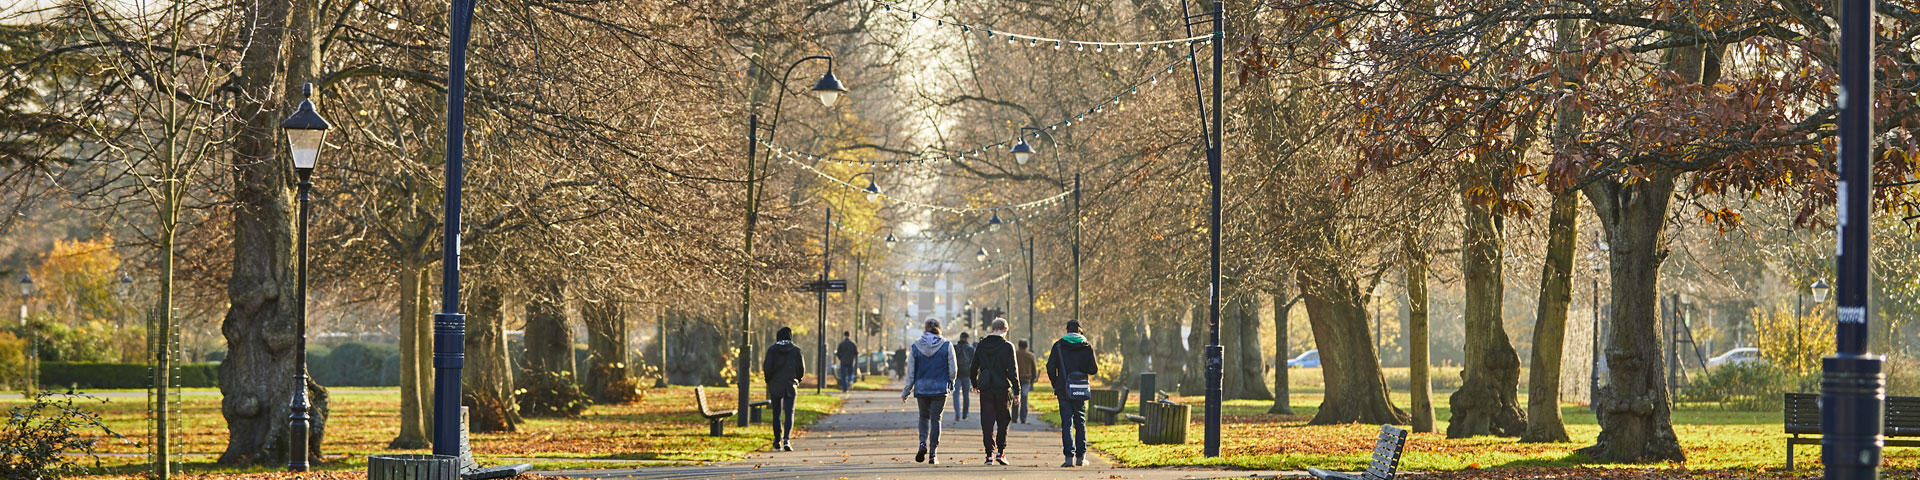 People walking through the park in autumn